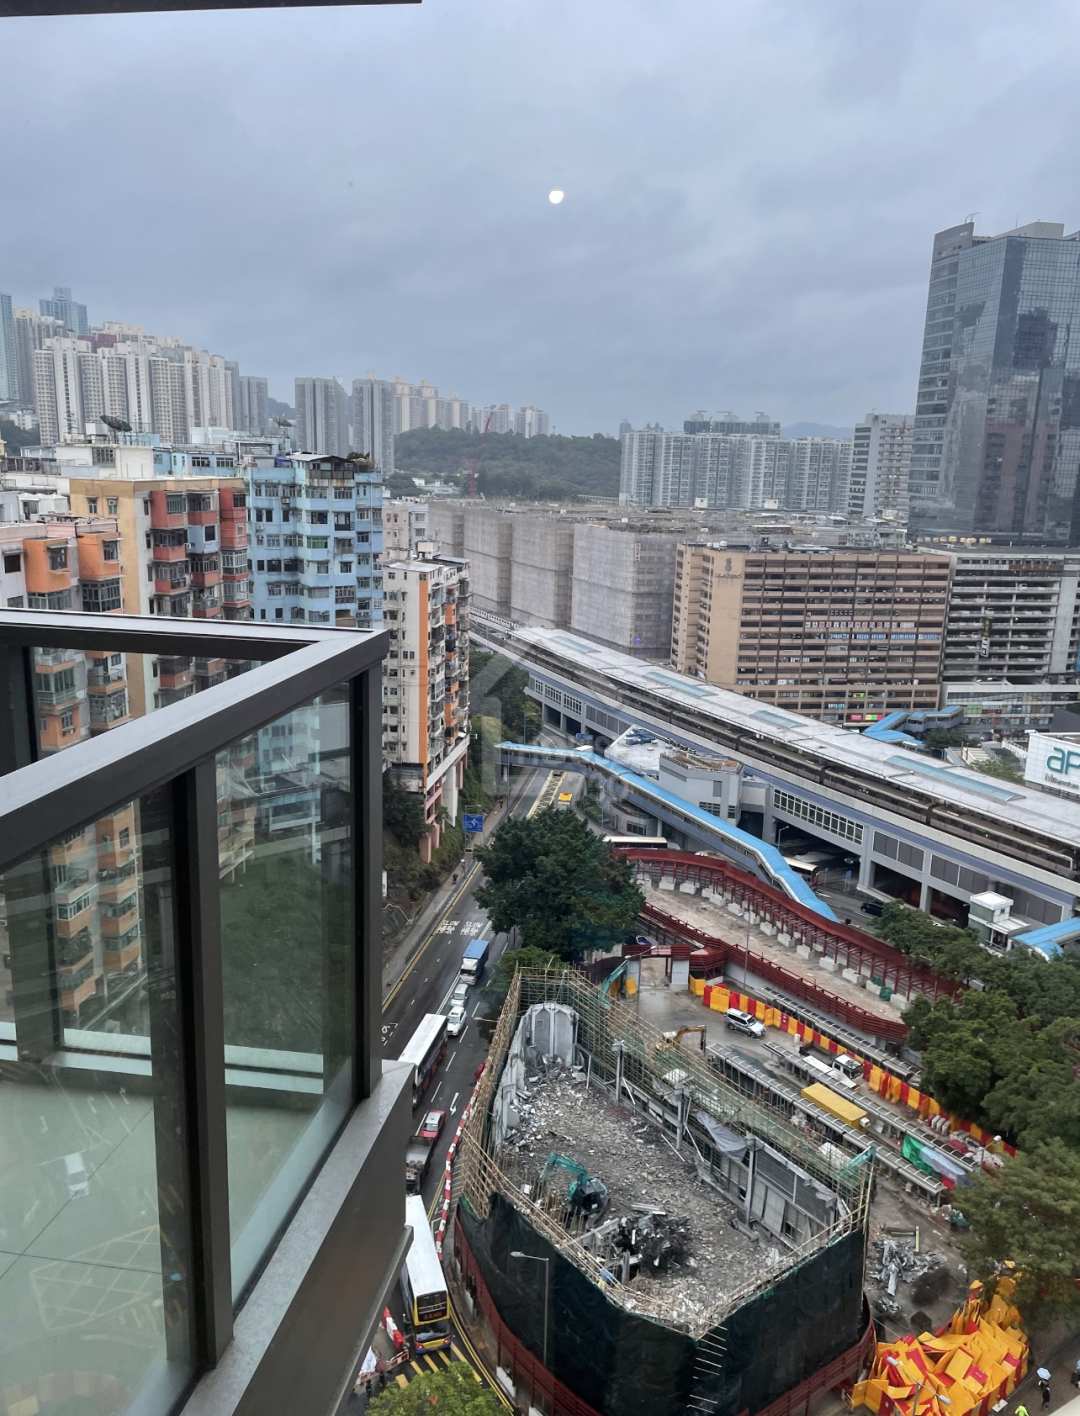 Kwun Tong GRAND CENTRAL Middle Floor View from Living Room House730-5138807